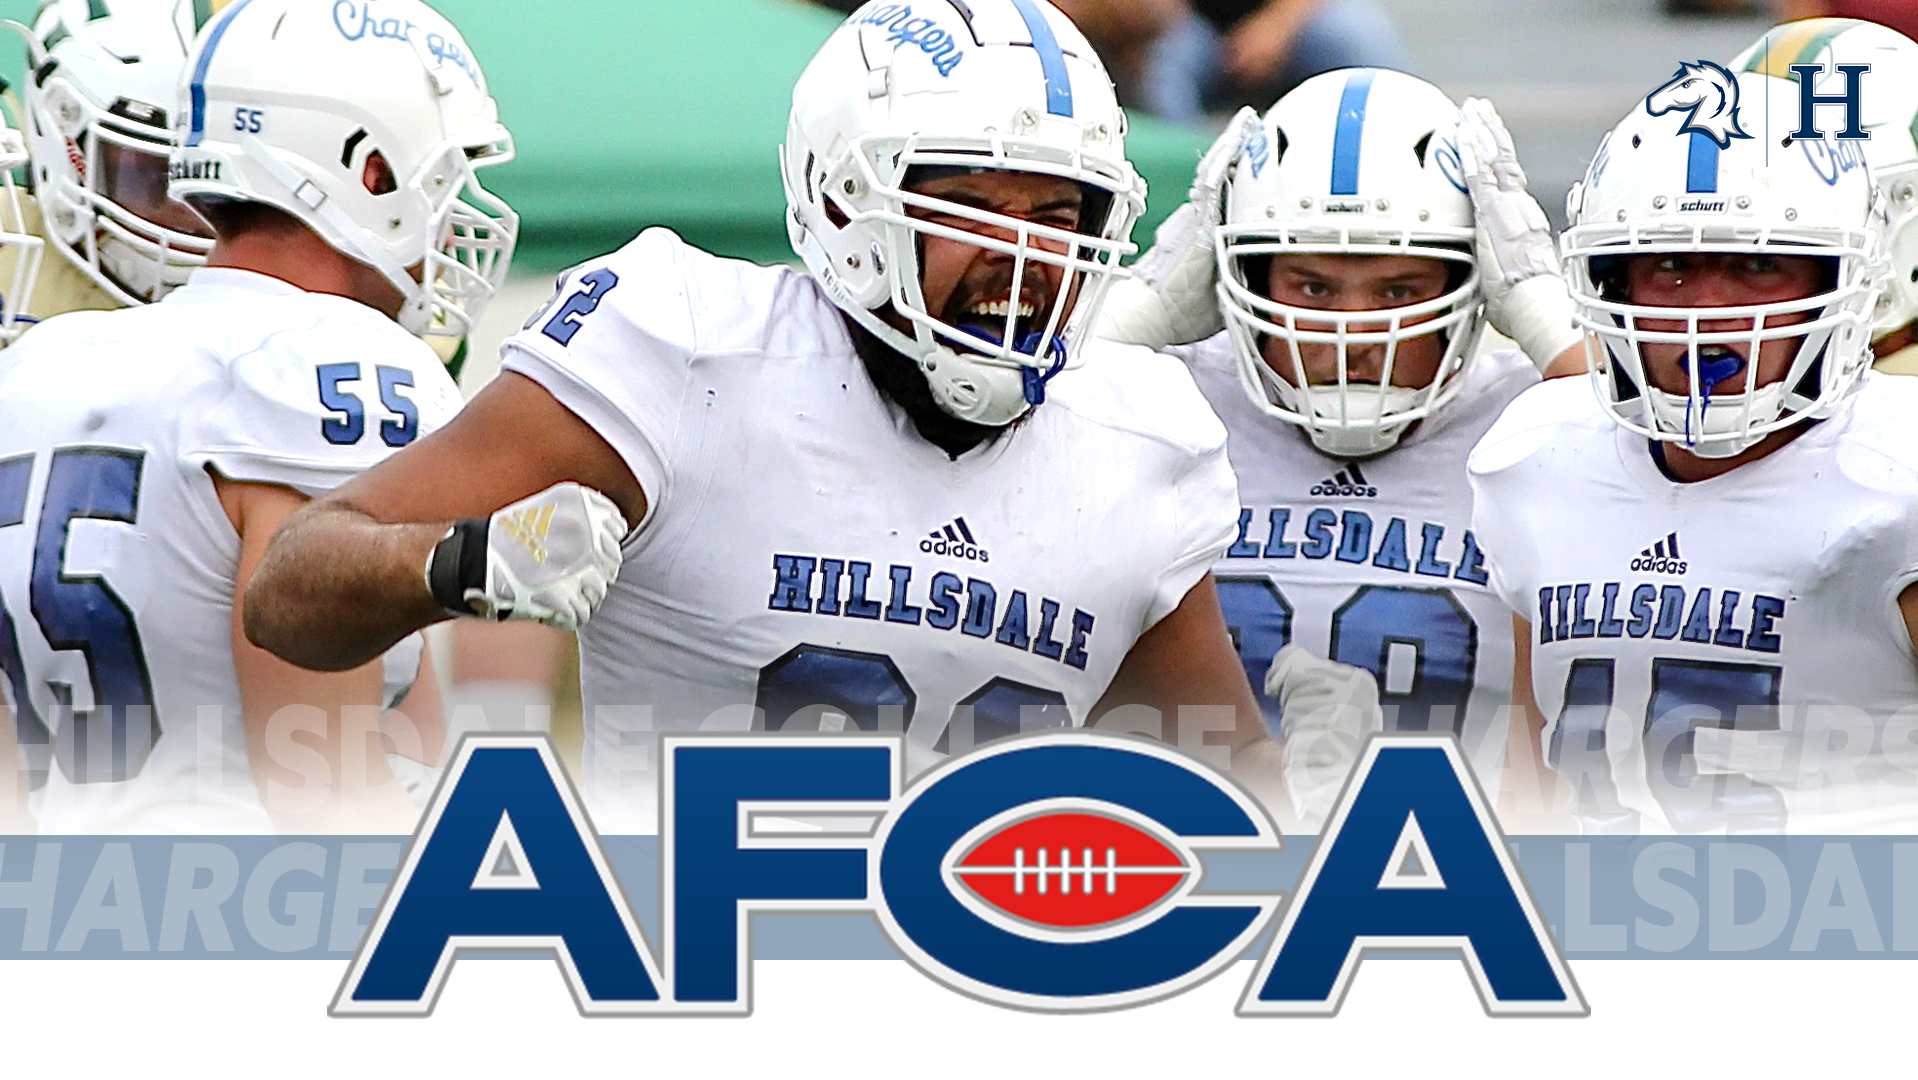 Chargers defensive tackle Nate Chambers earns  AFCA All-American honor